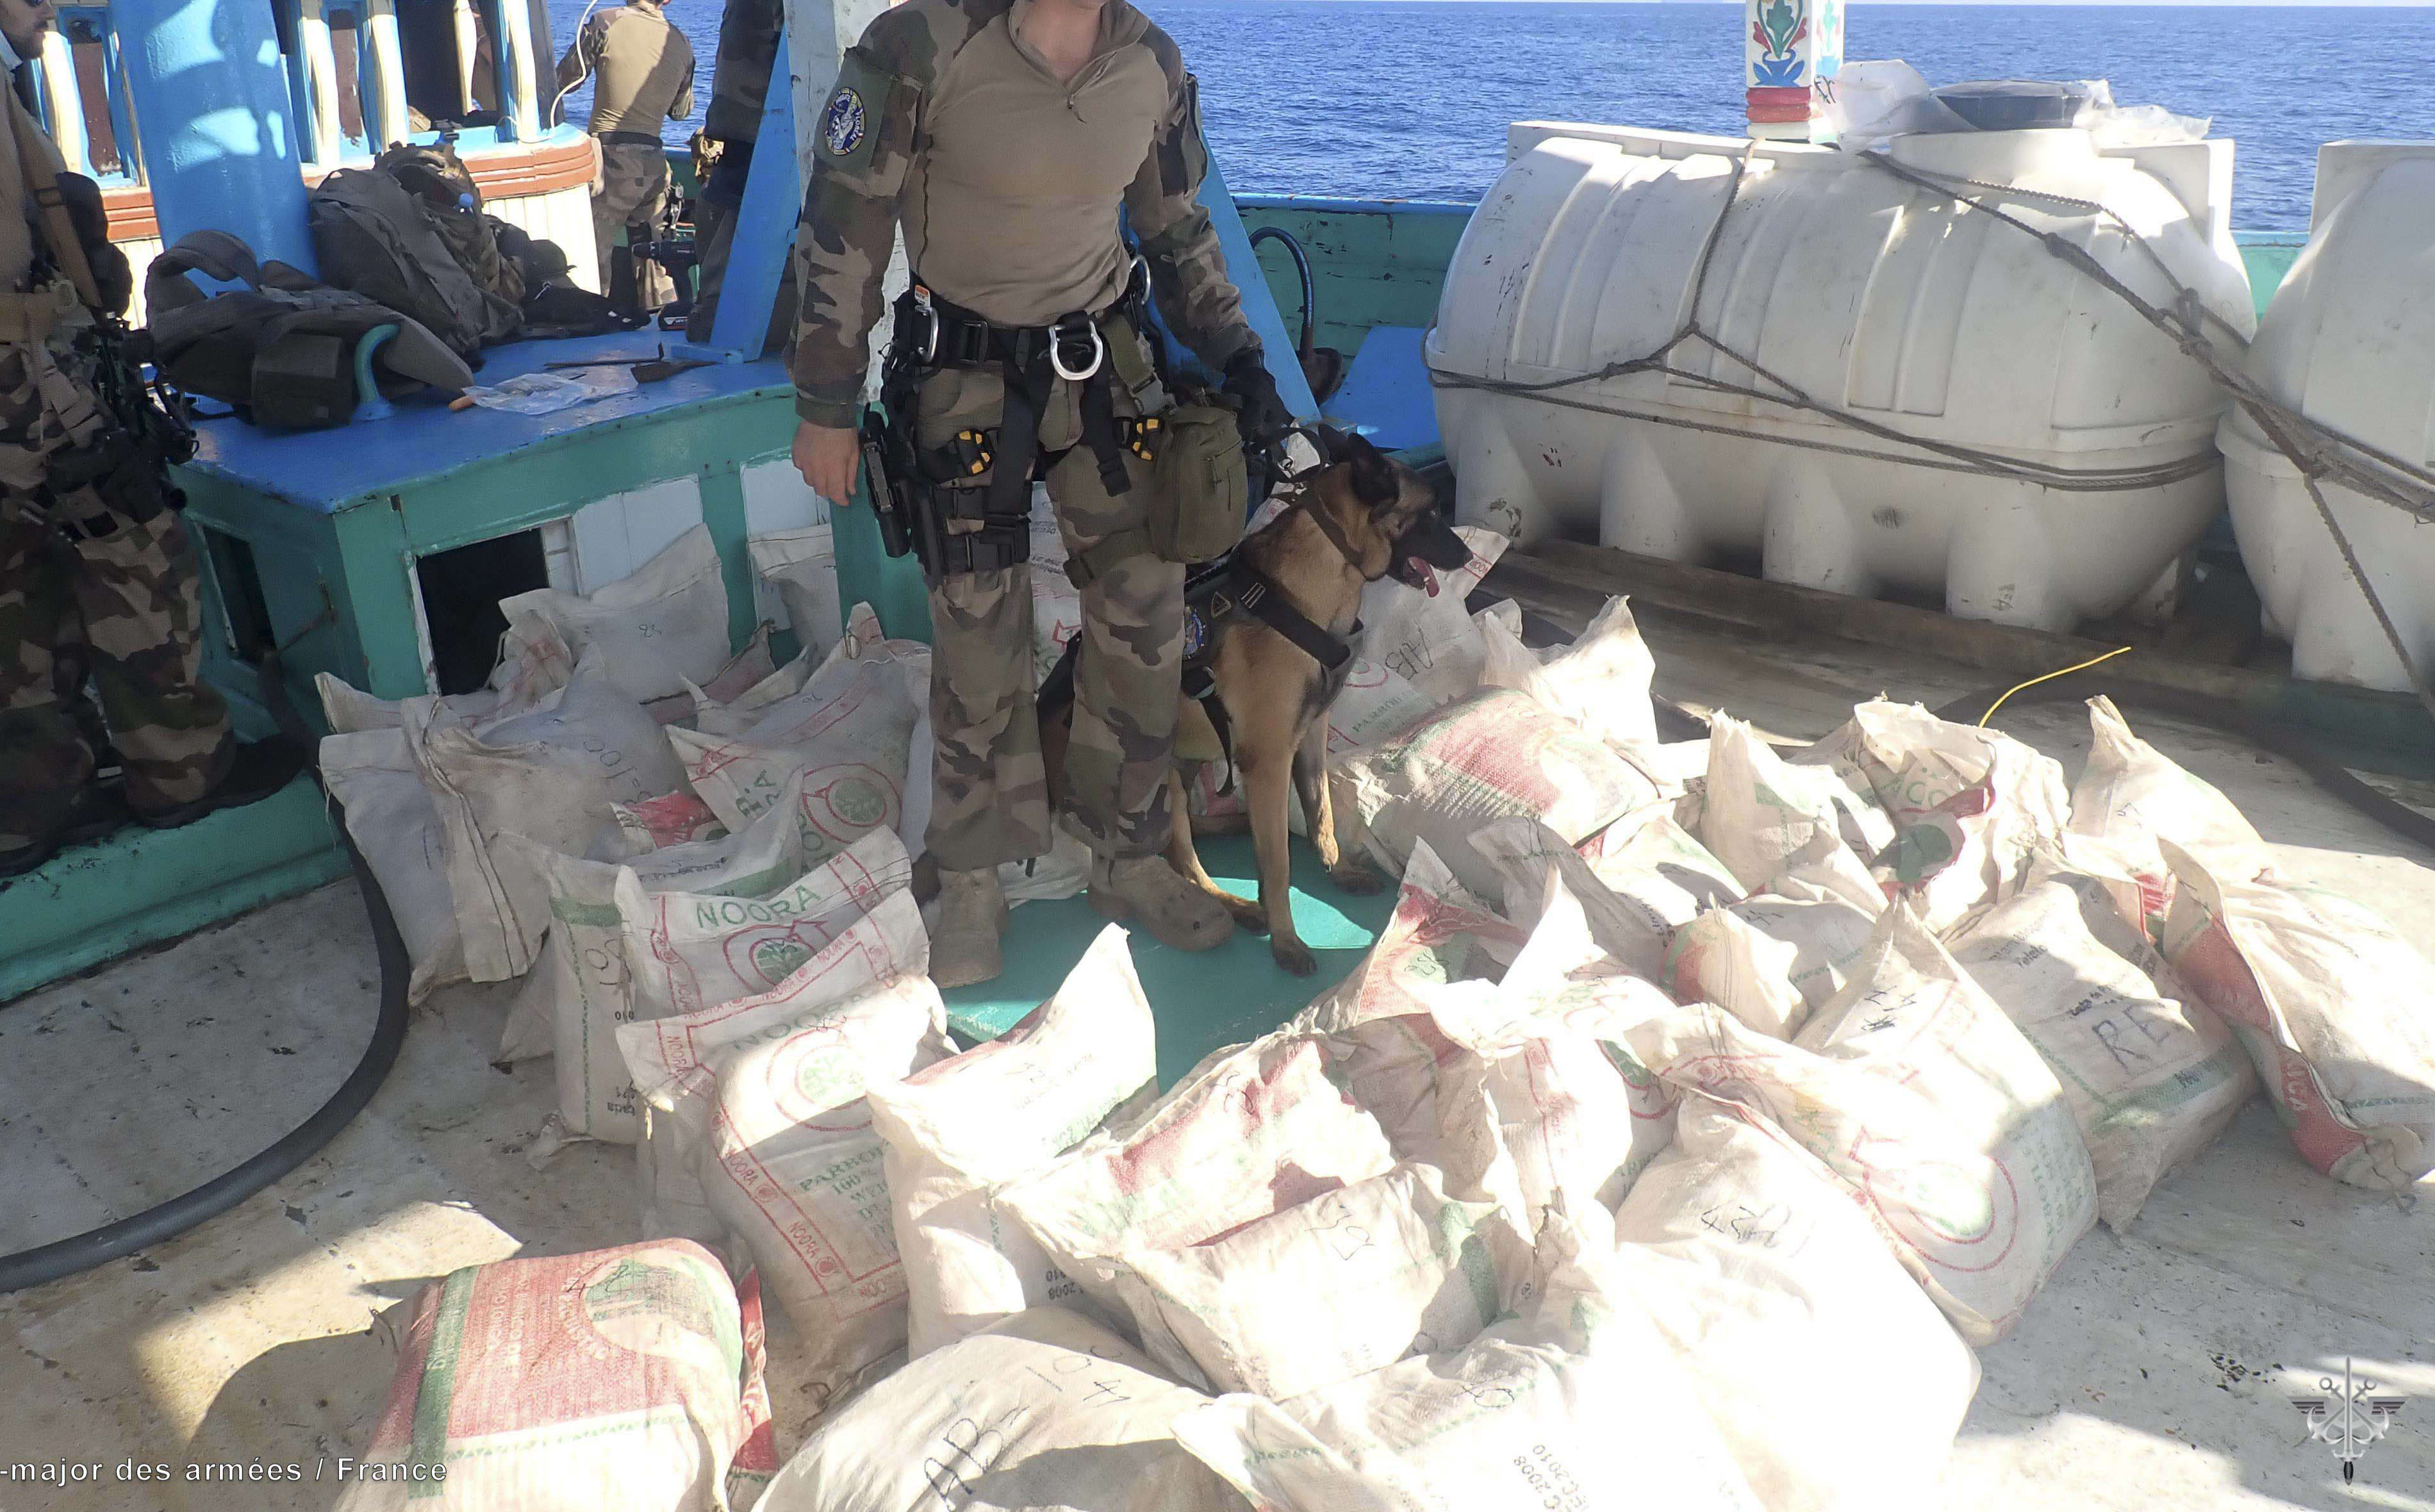 Sailors on French Frigate FS Floreal intercept vessels in the Indian Ocean and inventory illicit drugs seized.